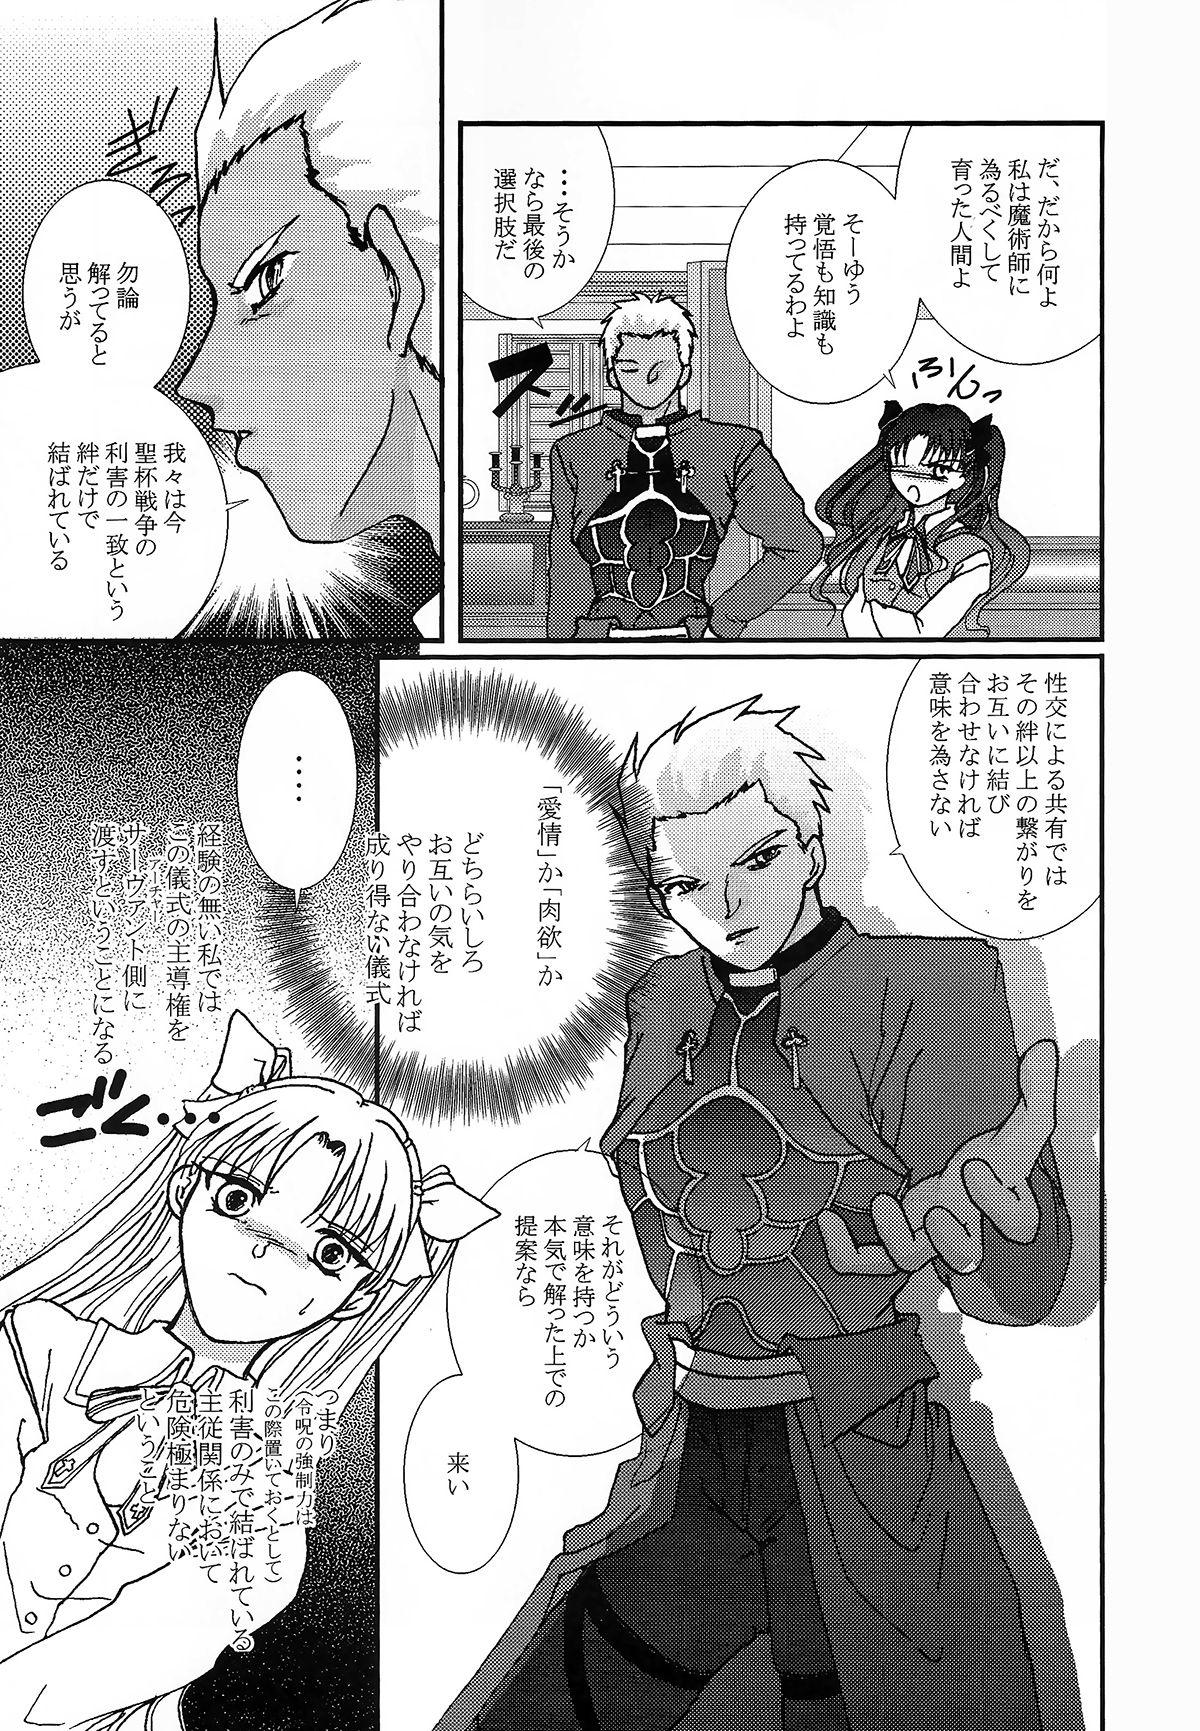 Tgirl Question-7 - Fate stay night College - Page 9